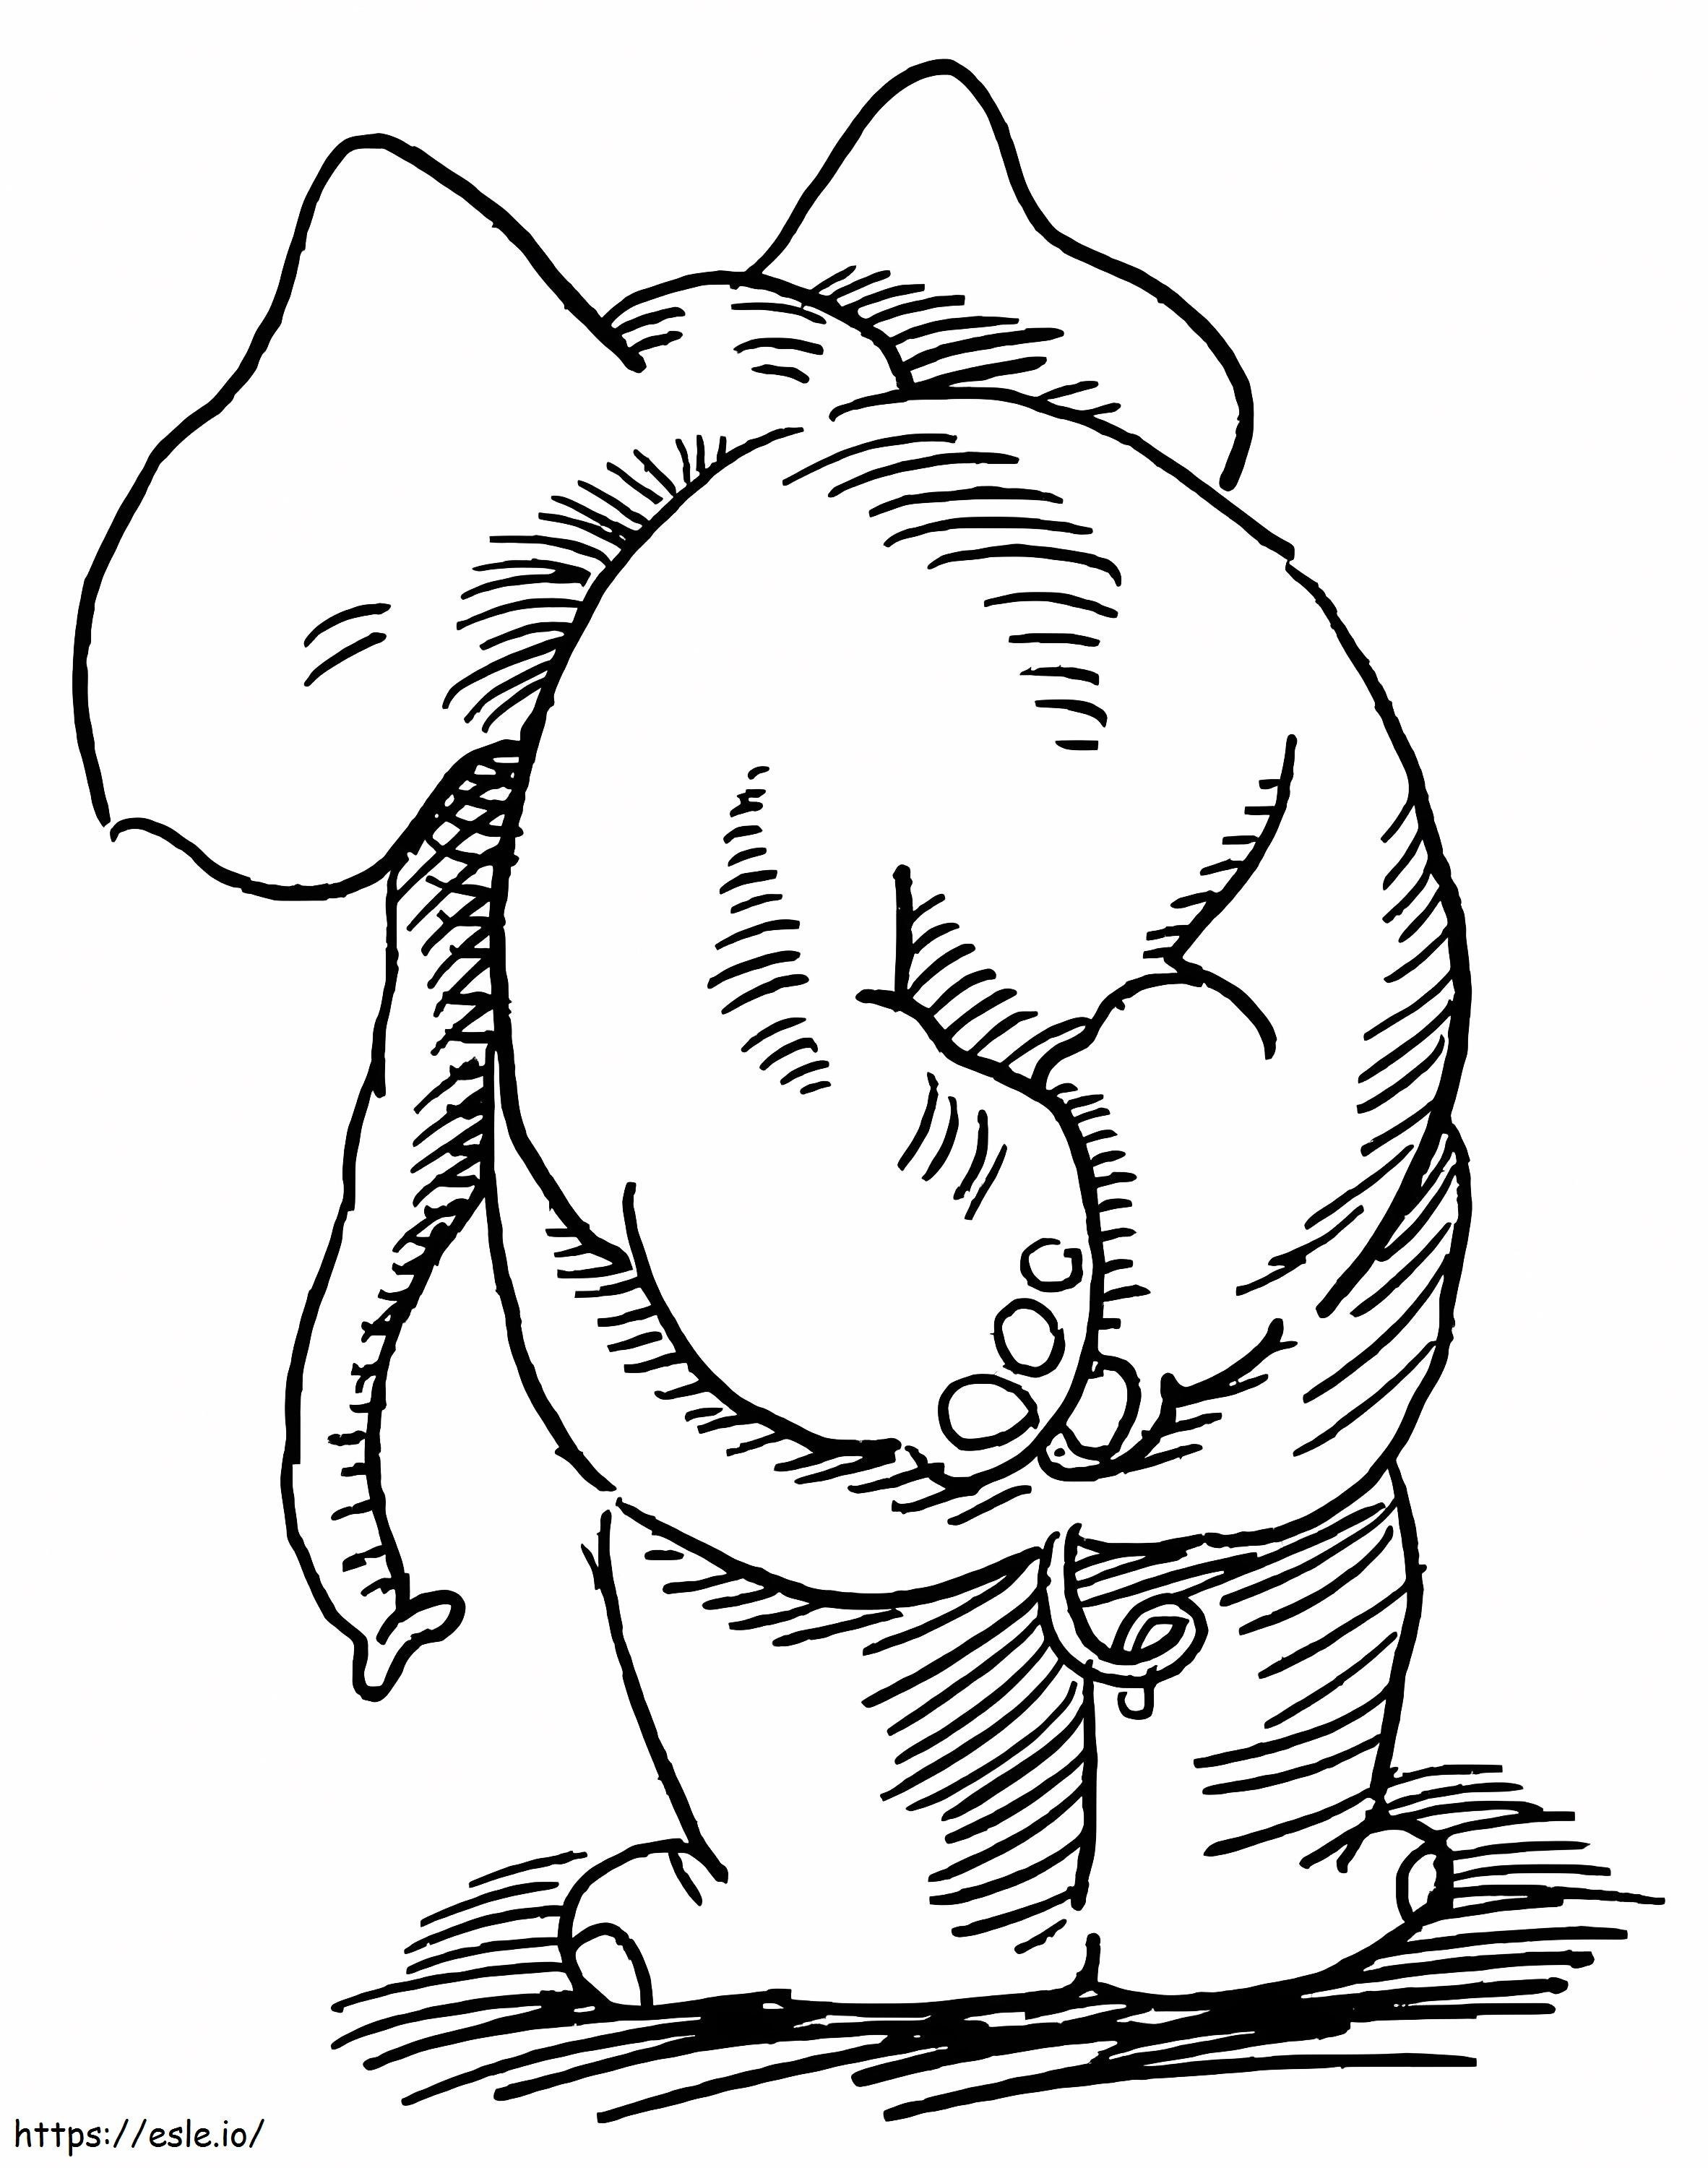 Elephant Is Thinking coloring page